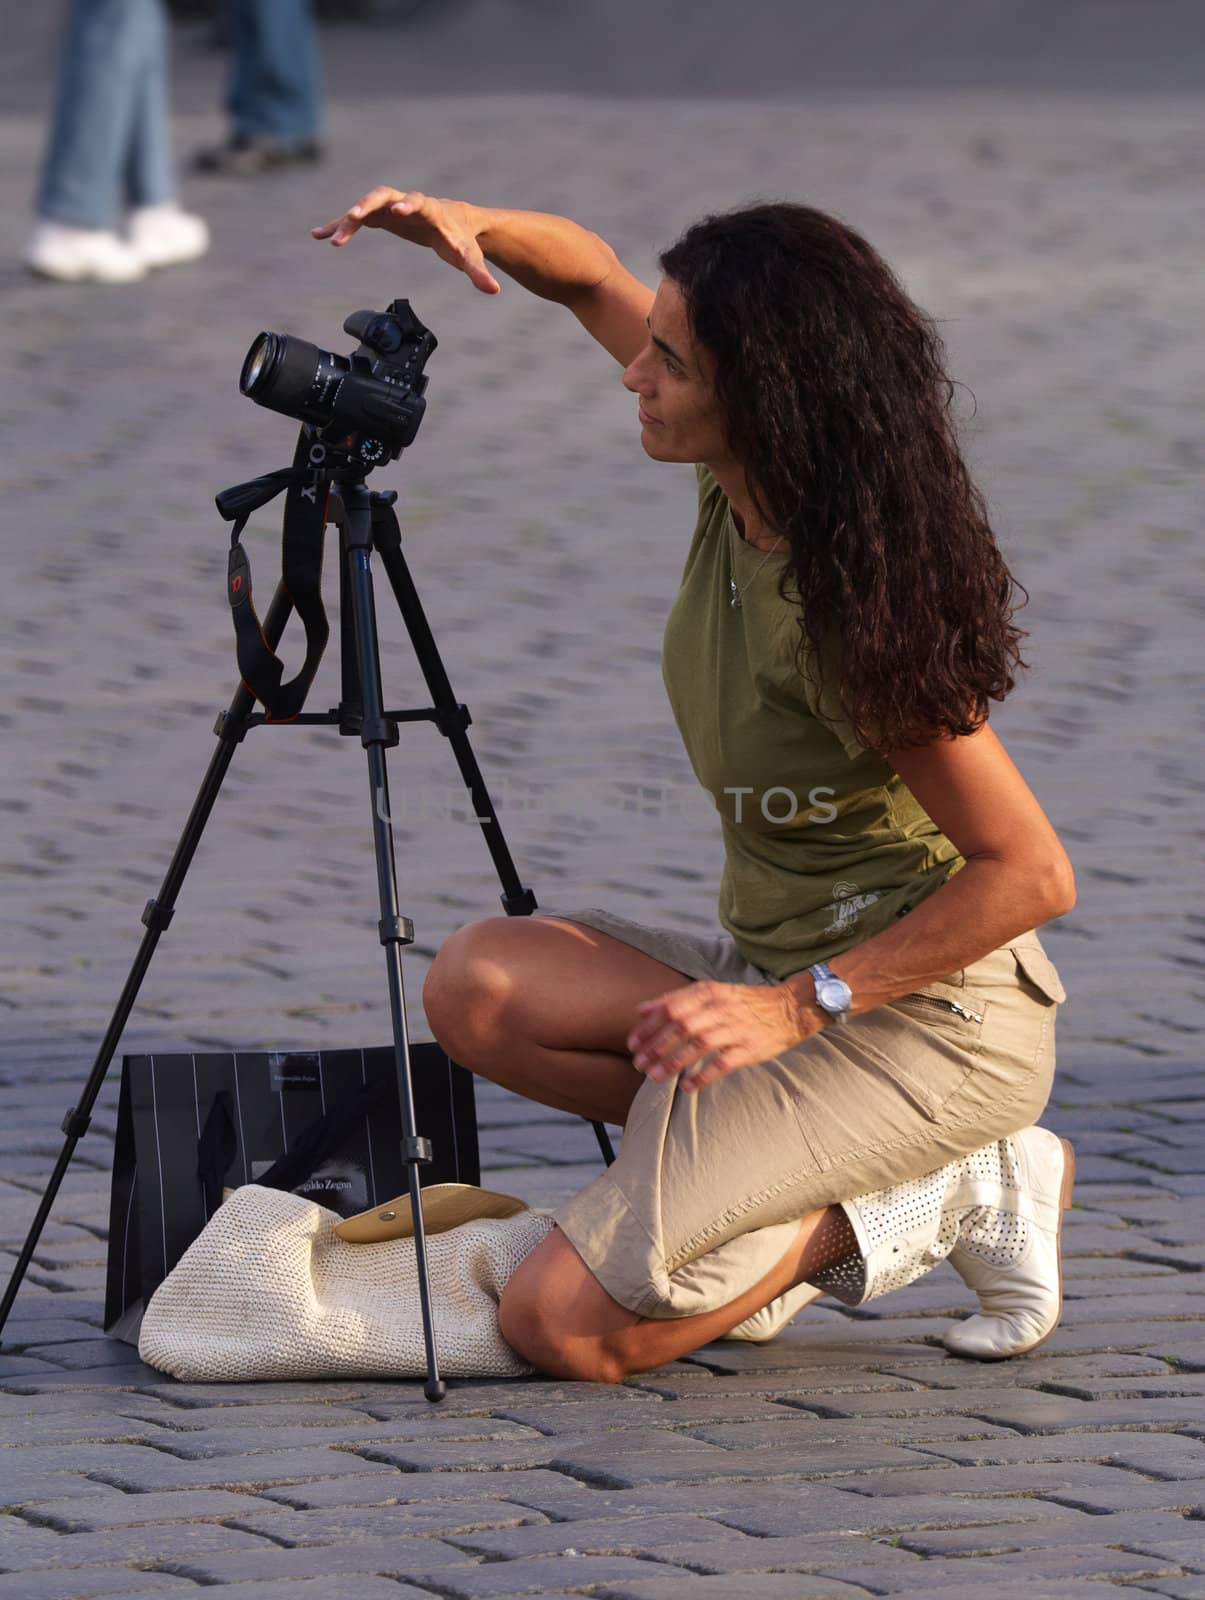 A female photographer at the time of shooting on the street